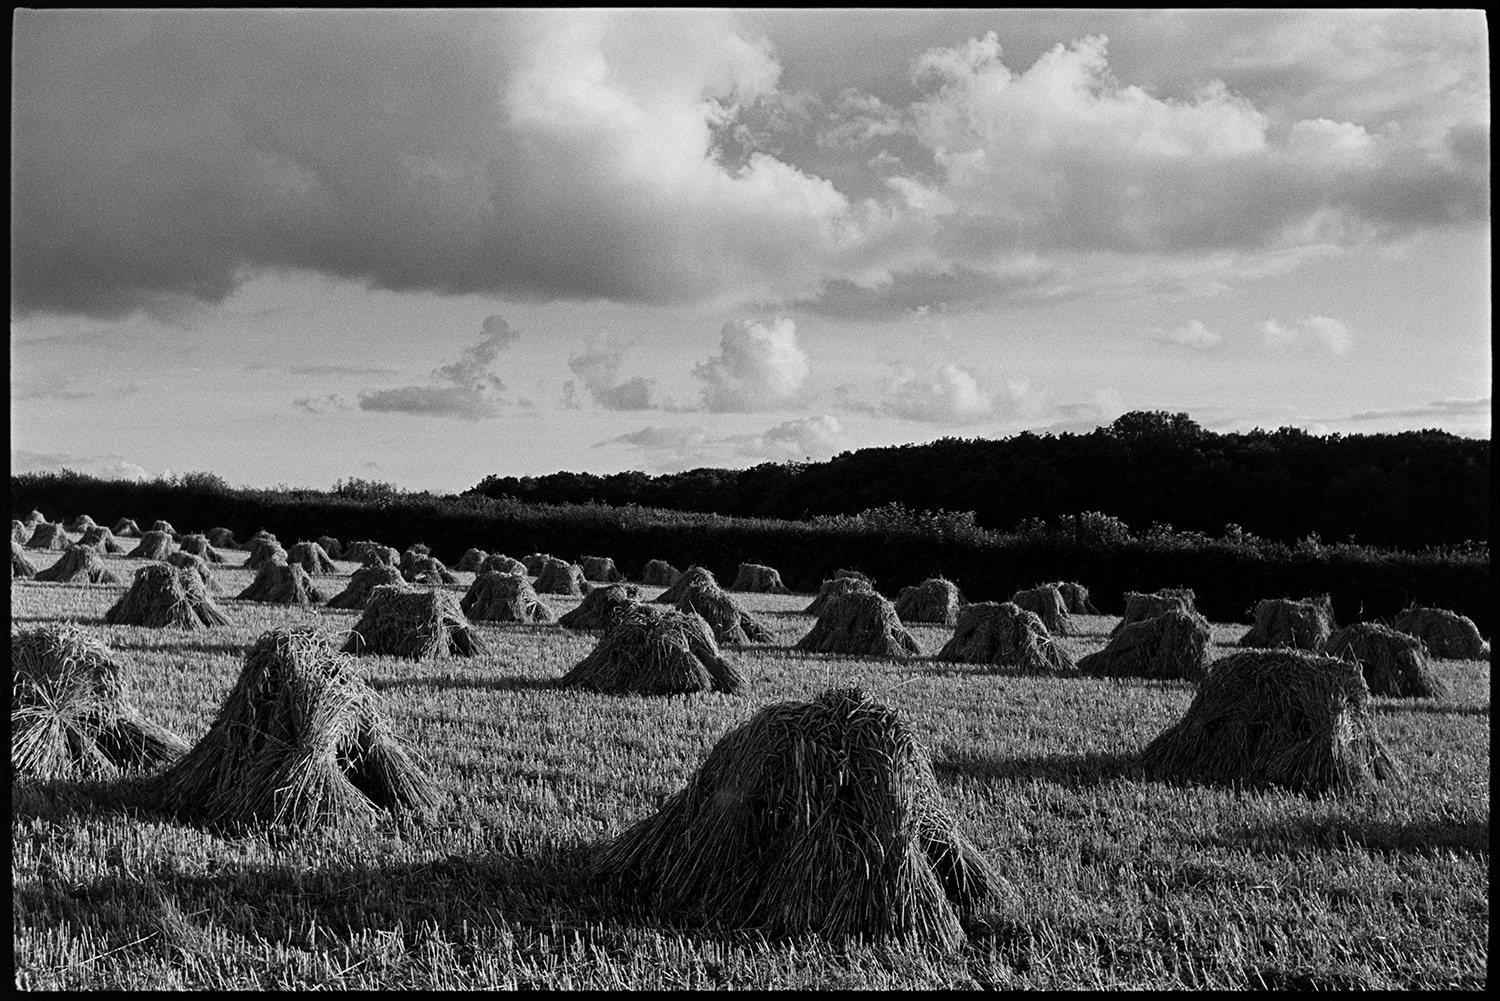 Corn stooks, sunlit evening with clouds.
[Rows of sunlit stooks in a cornfield at Windwhistle, Upcott, near Dolton, in the evening. Storm clouds are in the sky.]